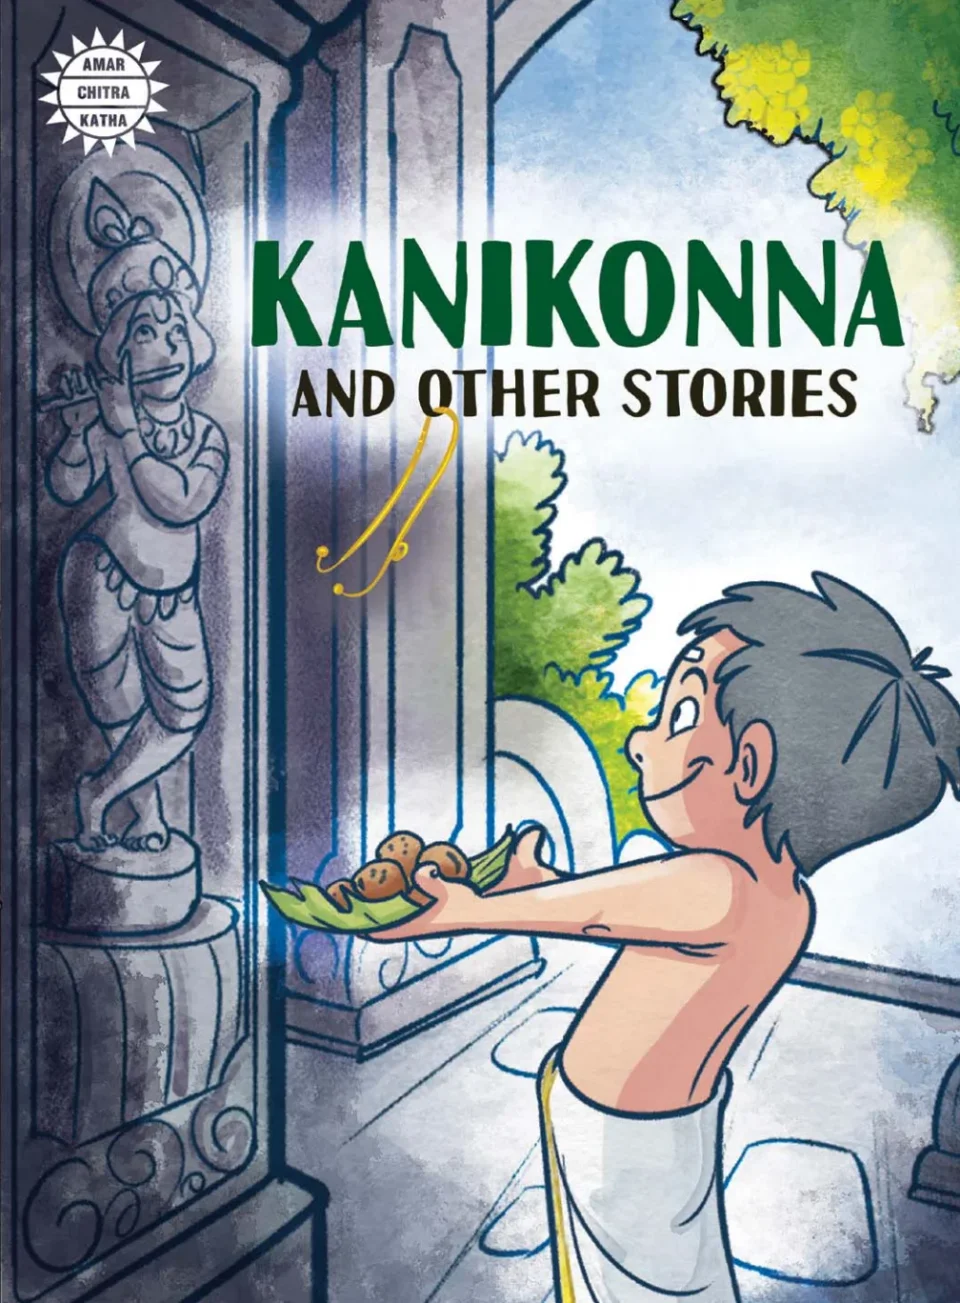 Kanikonna and other stories